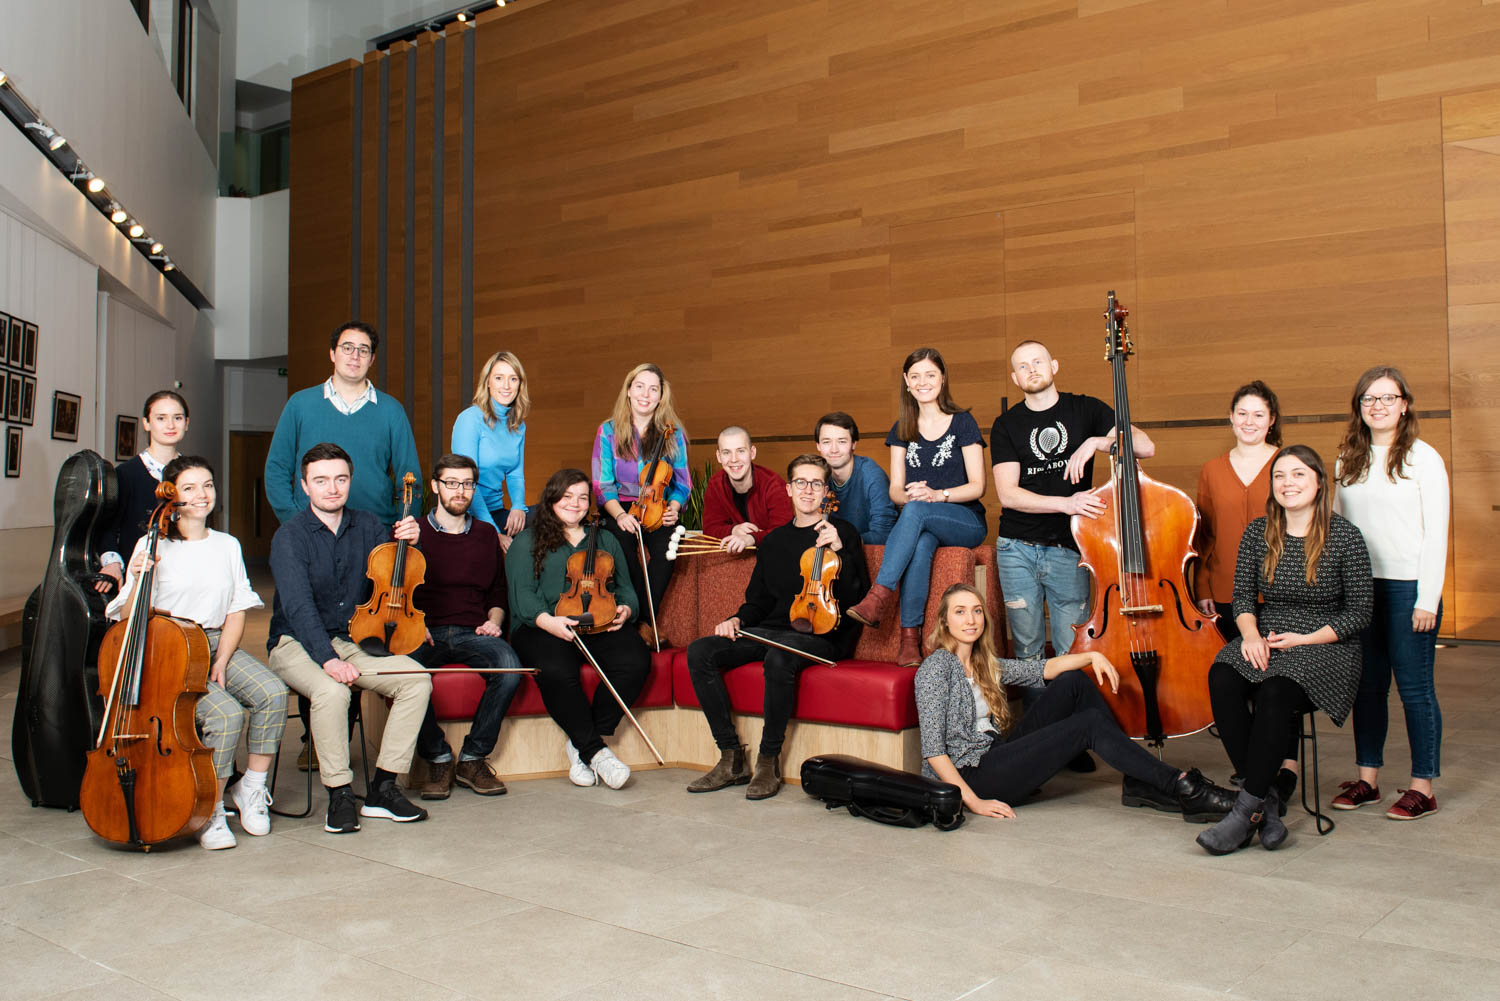 A group of musicians standing and sitting holding string instruments, smiling at the camera